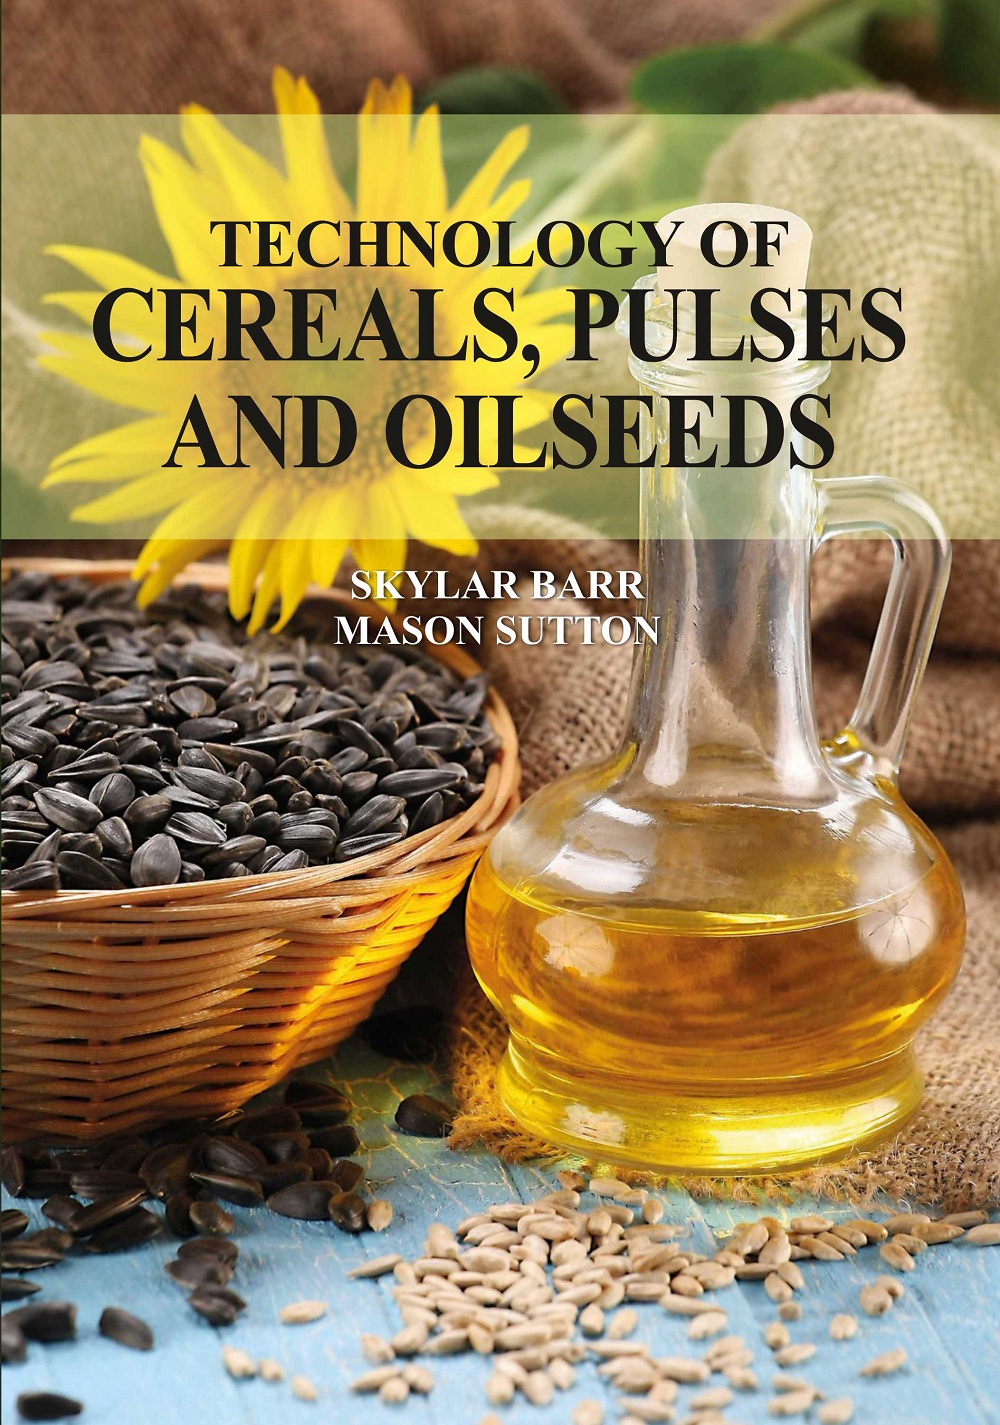 Technology of cereals, pulses and oilseeds